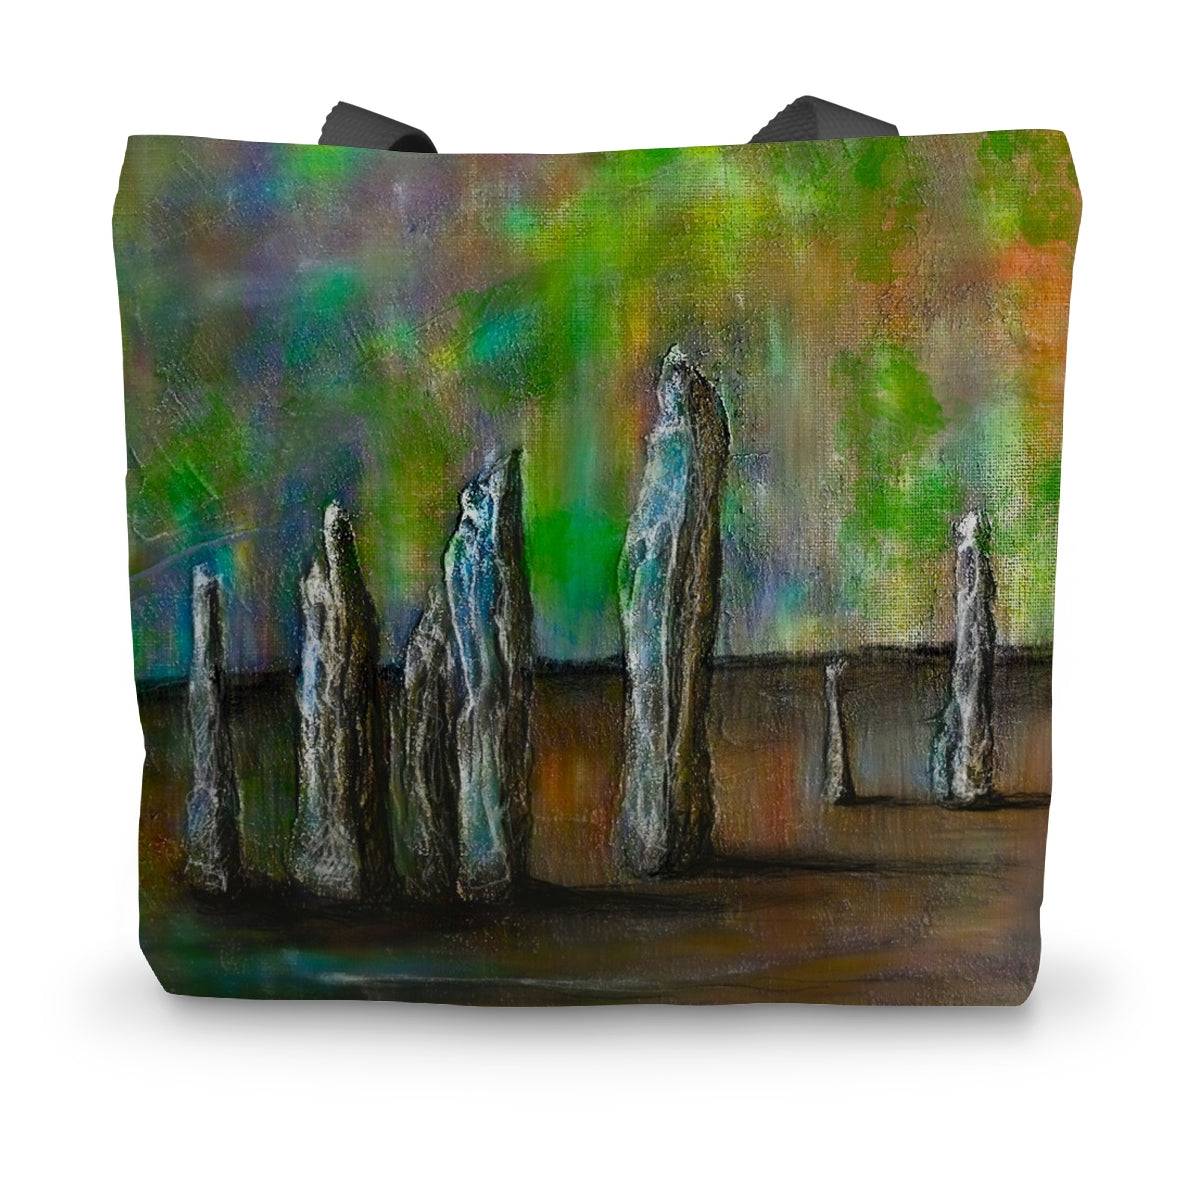 Callanish Northern Lights Art Gifts Canvas Tote Bag-Bags-Hebridean Islands Art Gallery-14"x18.5"-Paintings, Prints, Homeware, Art Gifts From Scotland By Scottish Artist Kevin Hunter